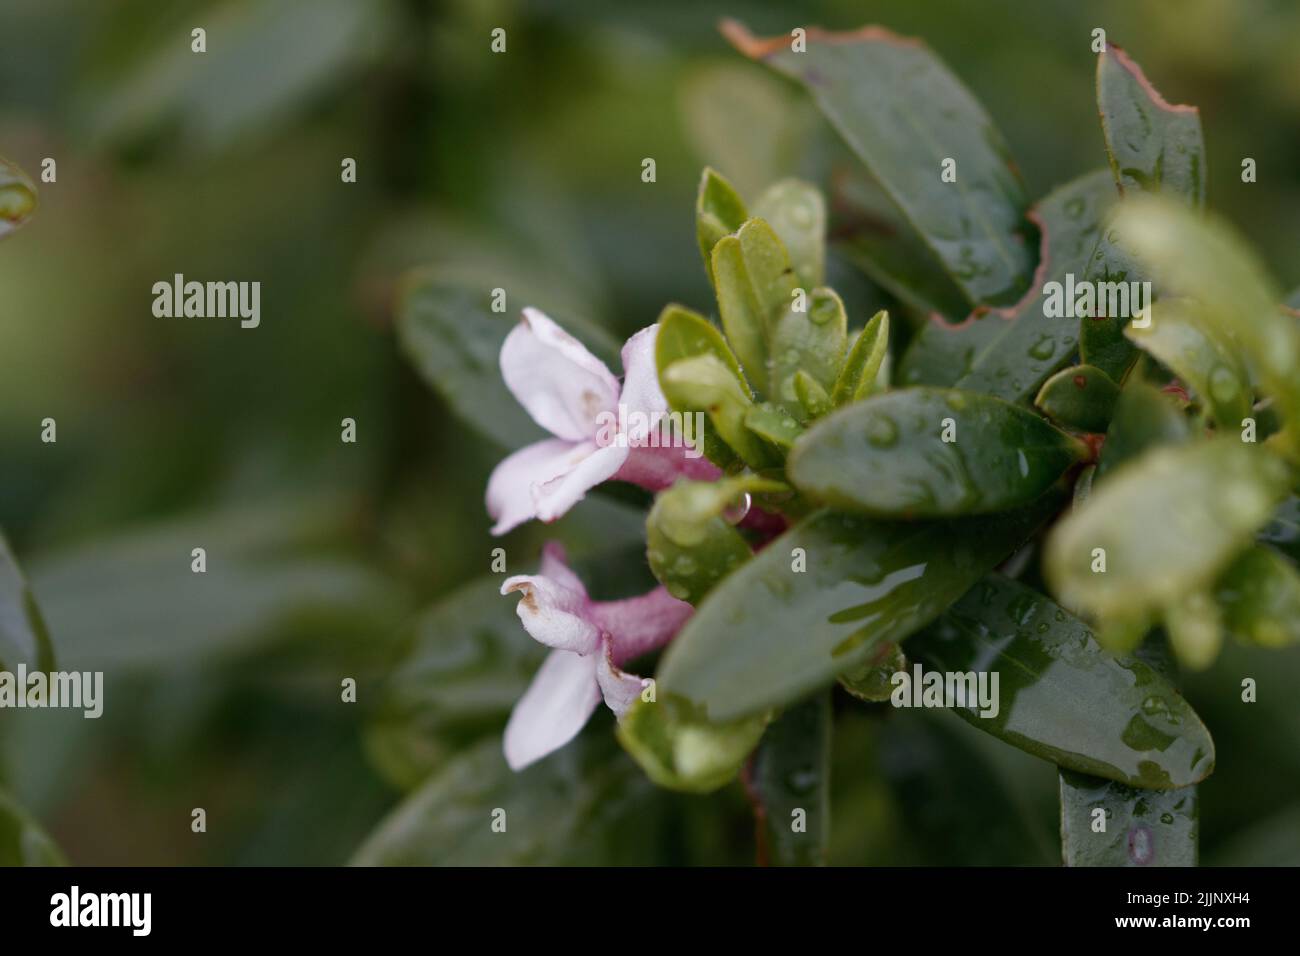 A close-up shot of a Daphne tangutica isolated on a blurred background Stock Photo